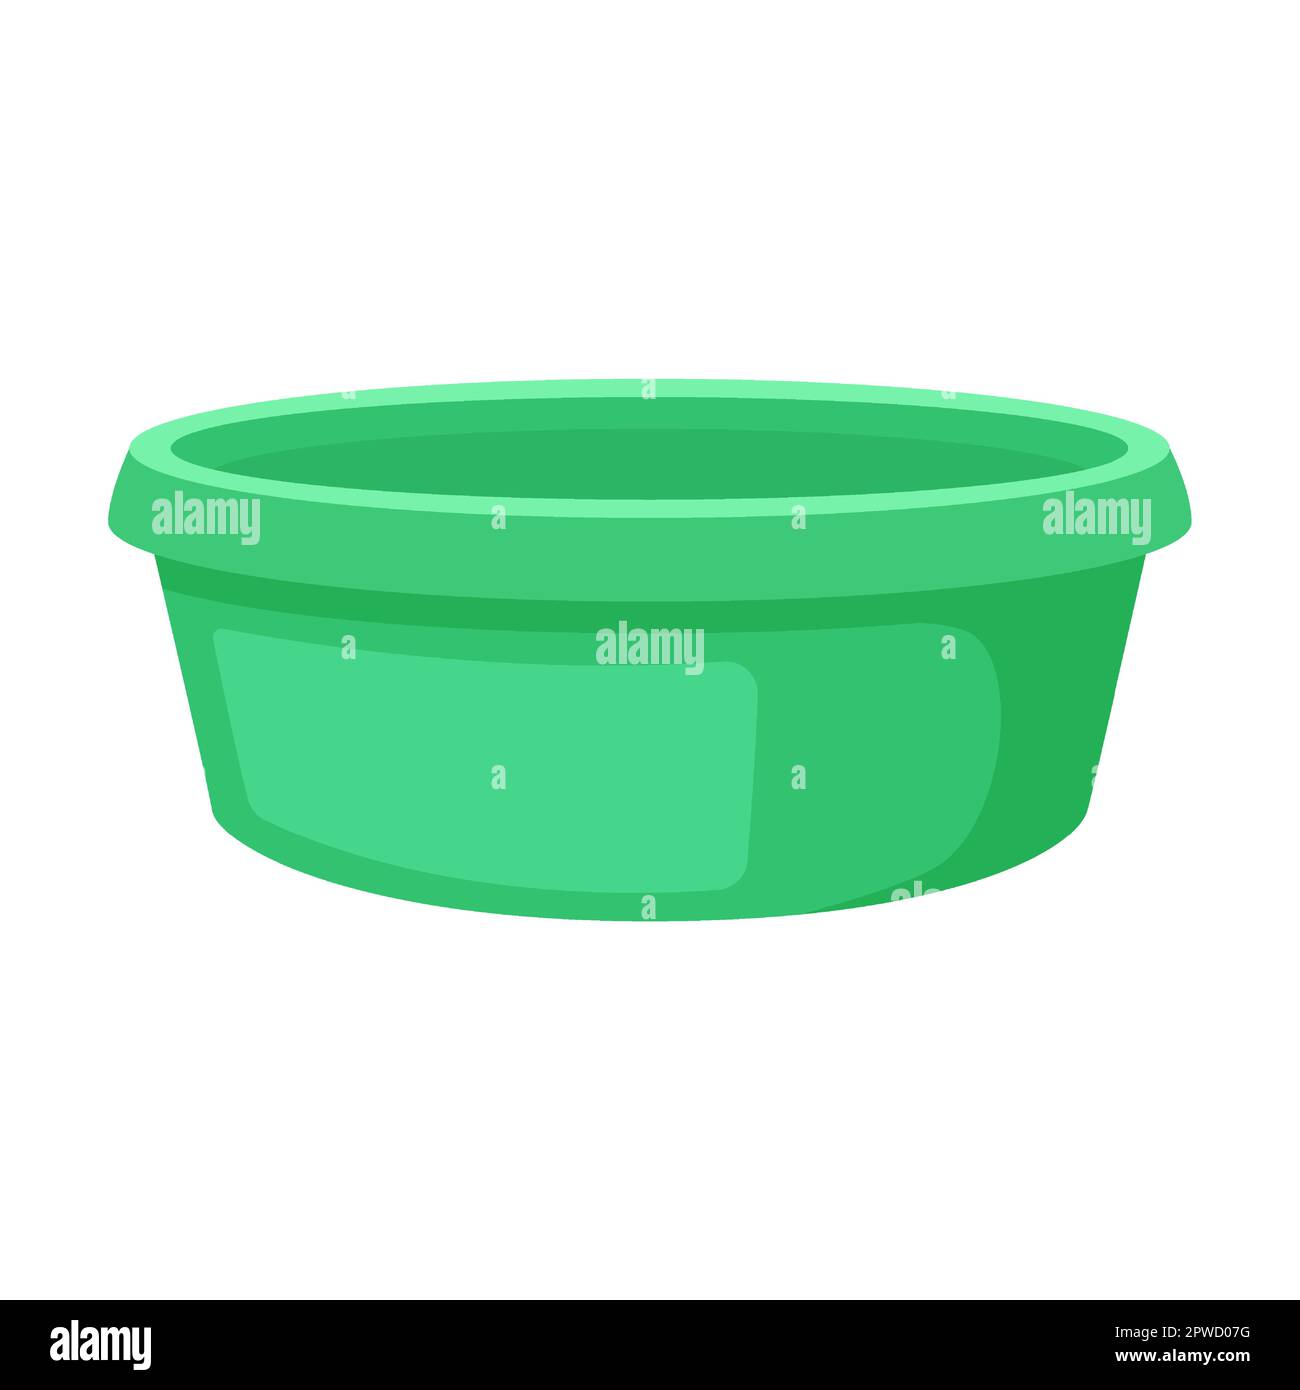 green basin for laundry, barrel and bucket with convenient spout for draining water. Vector illustration of cute colorful washbowl Stock Vector